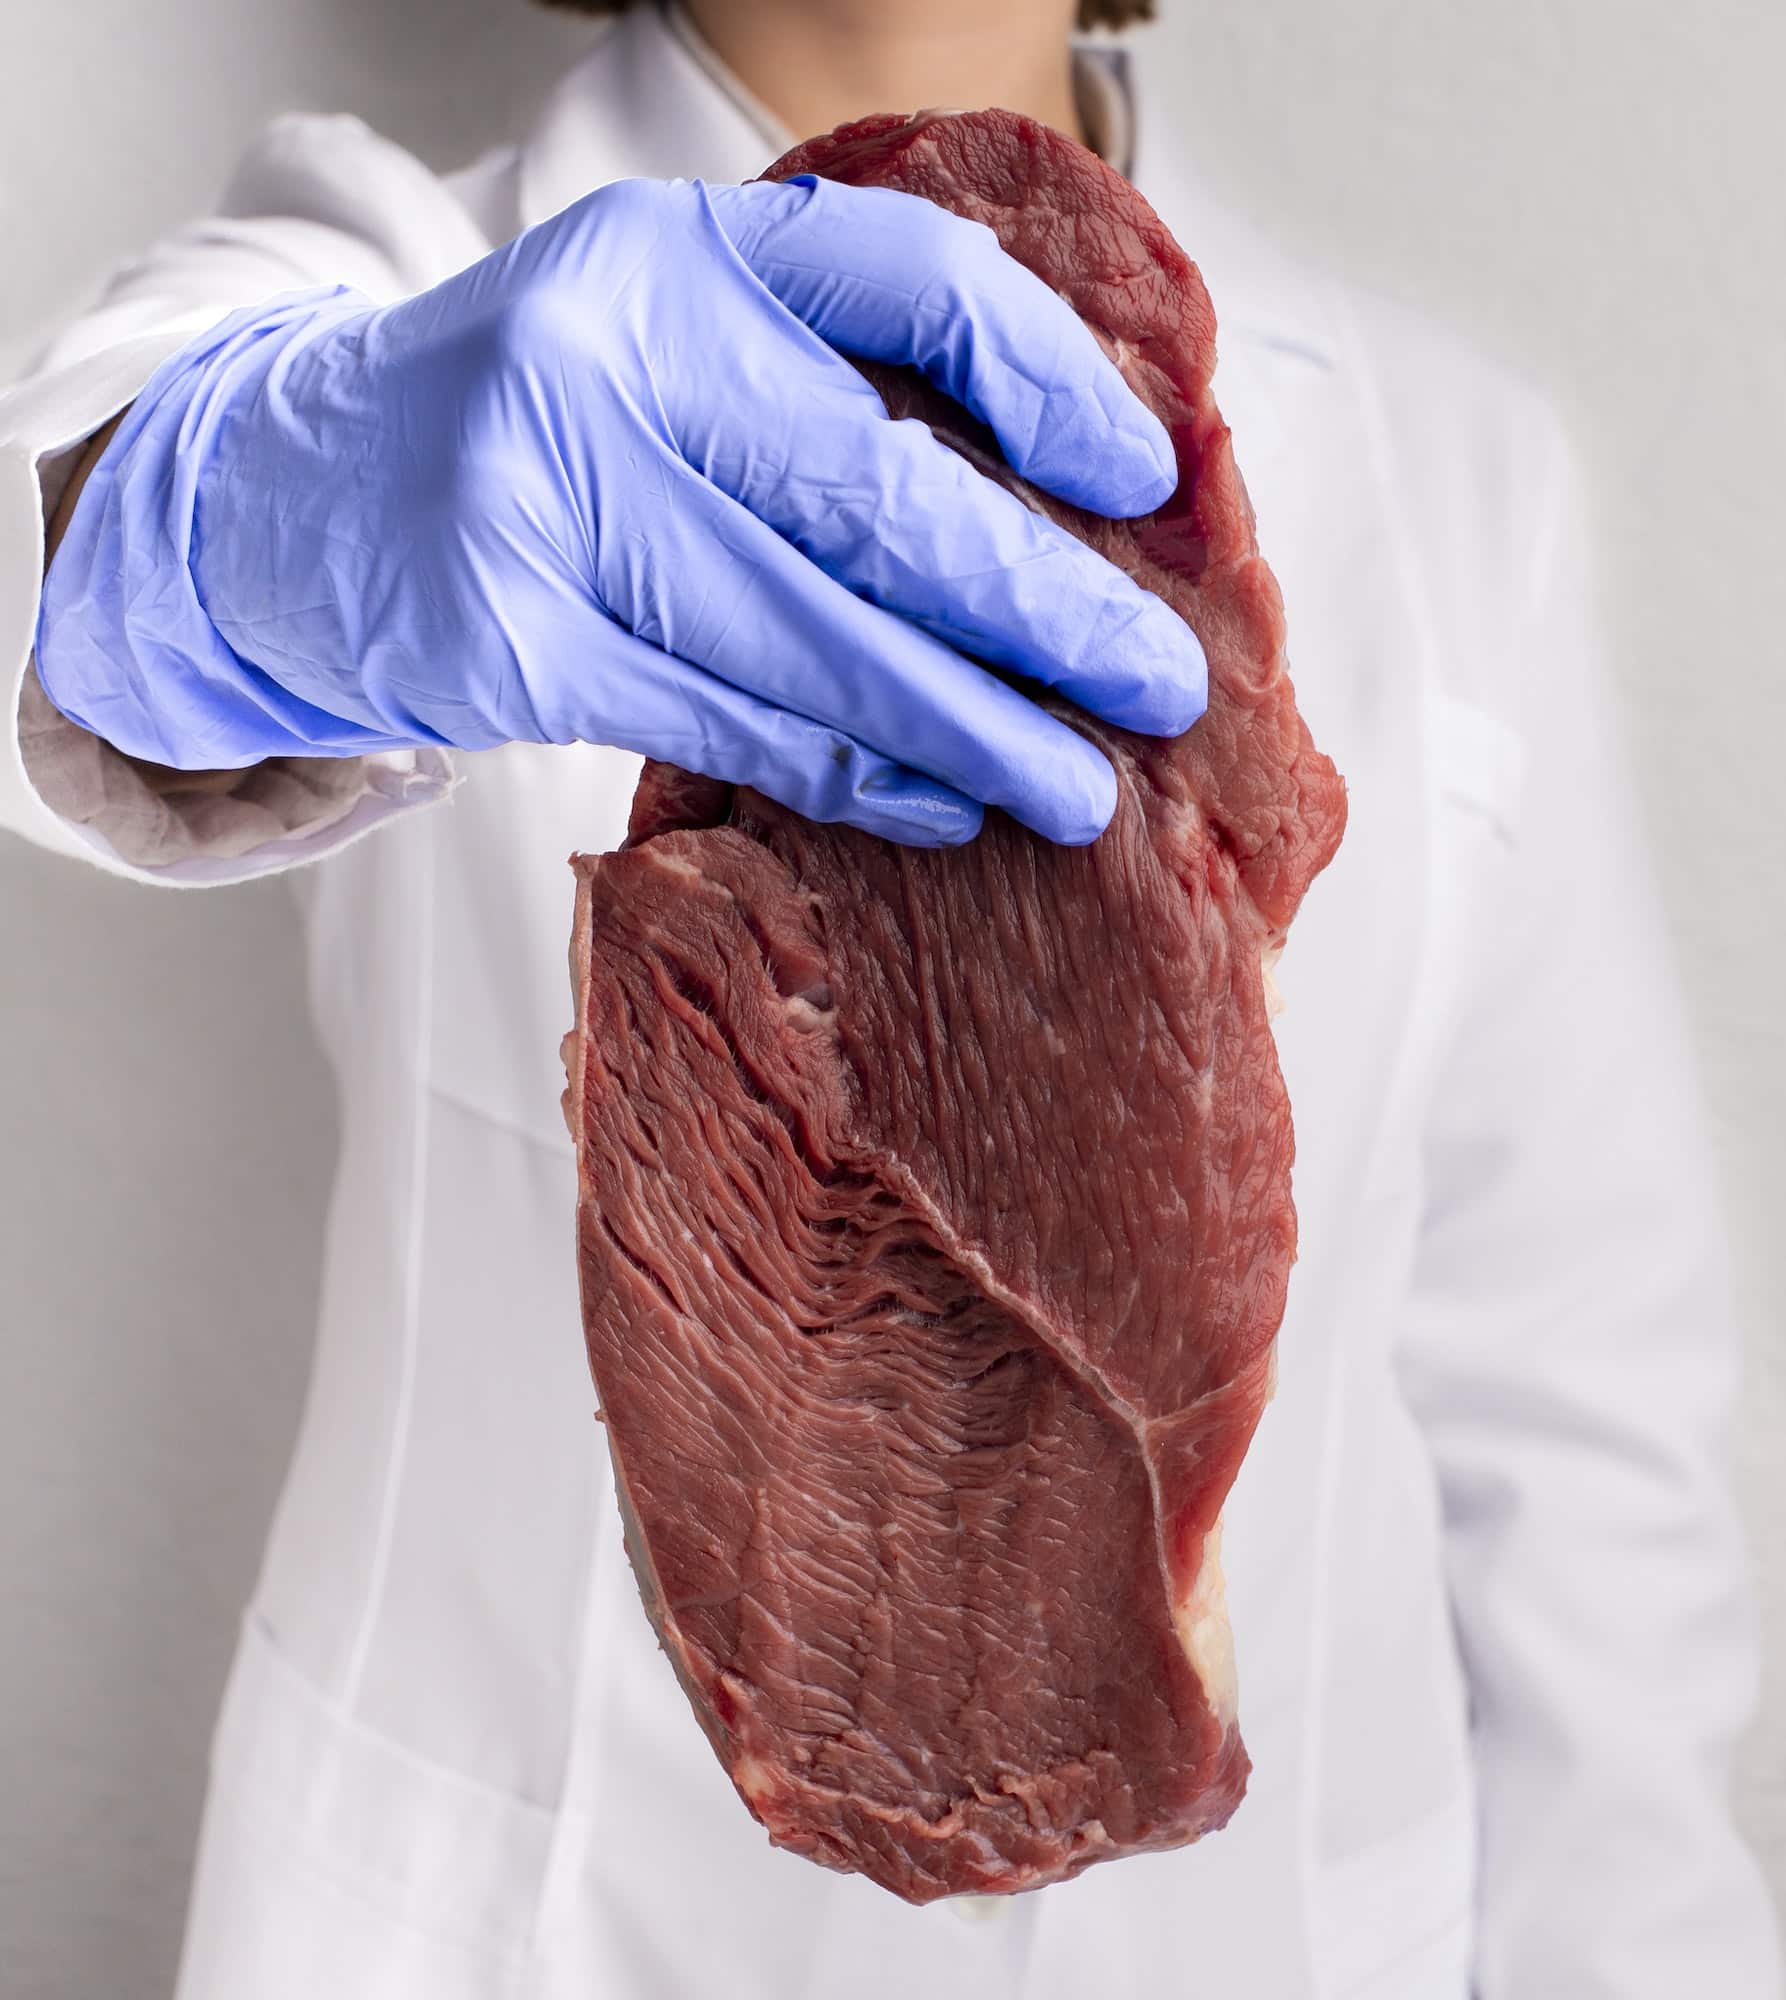 Scientist in gloves holds raw meat, cropped